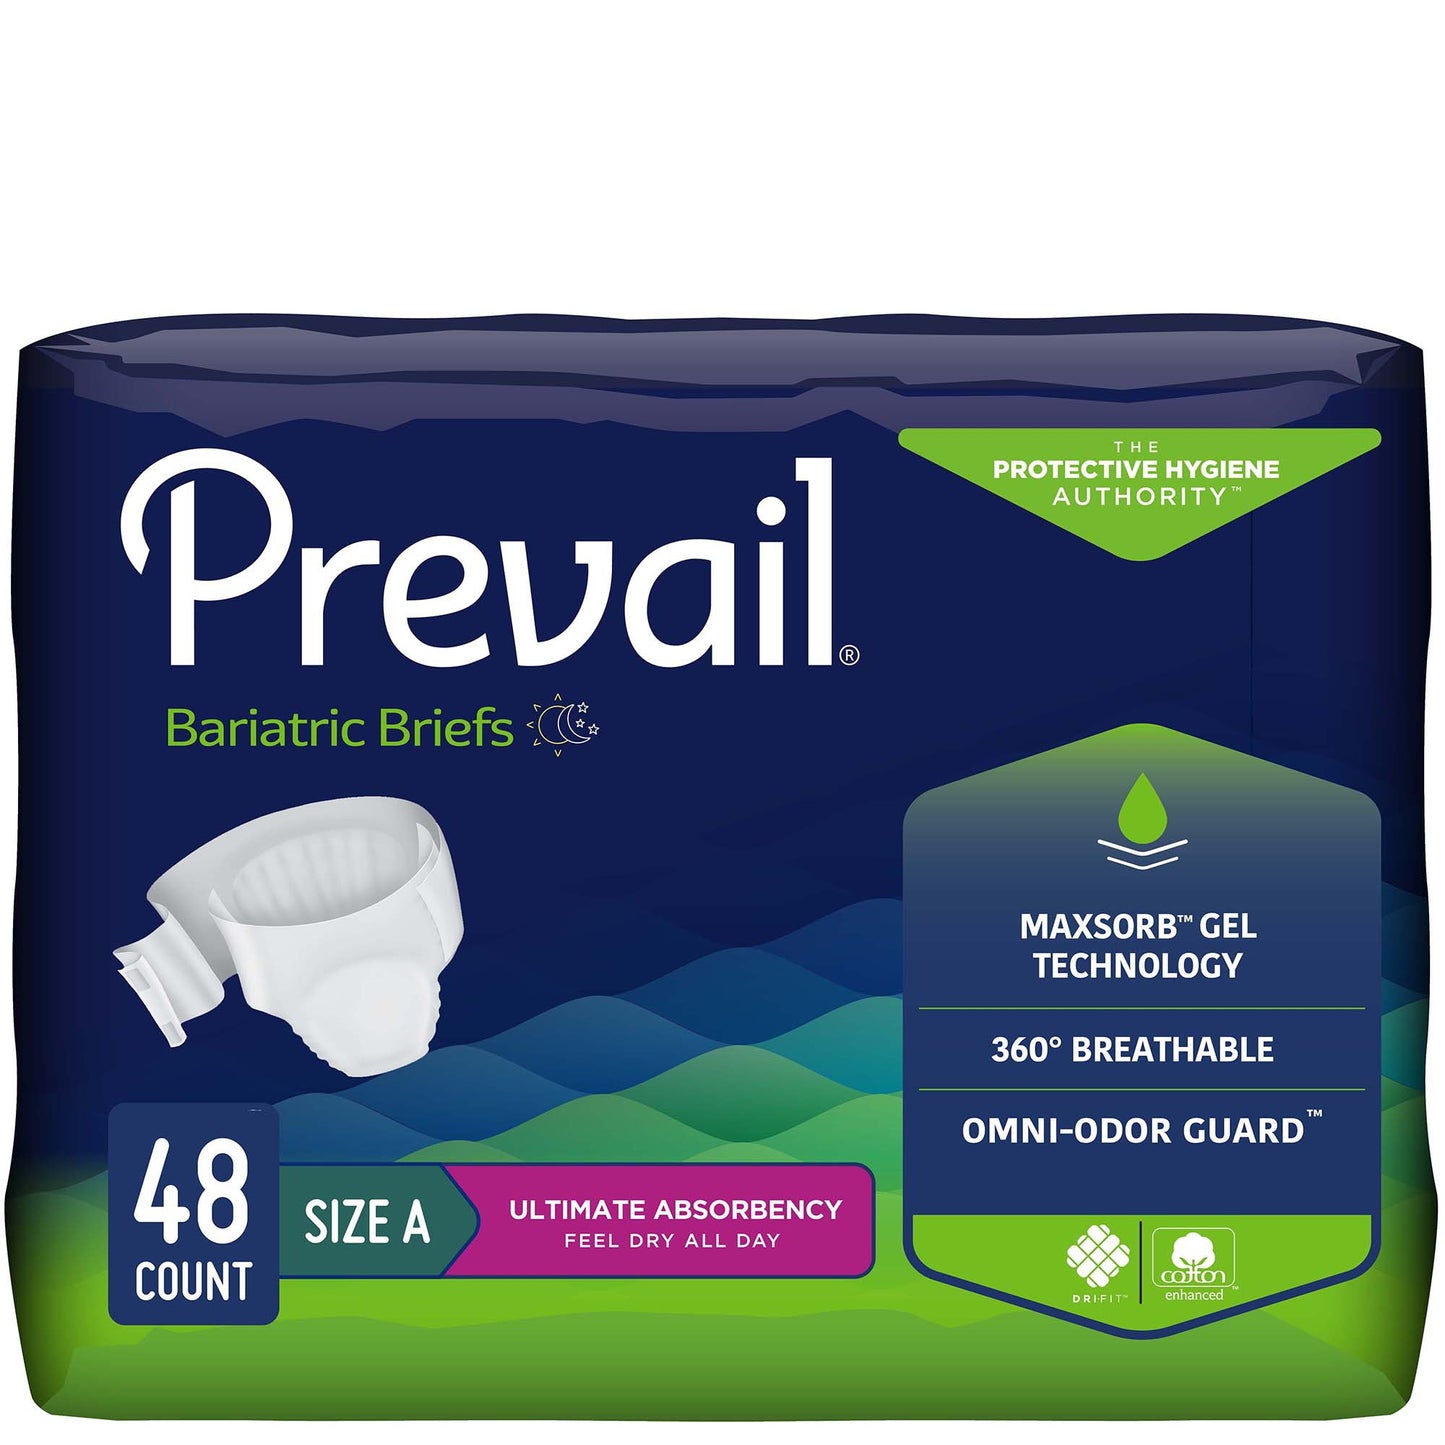 Prevail® Bariatric Ultimate Incontinence Brief, Size A, 12 ct